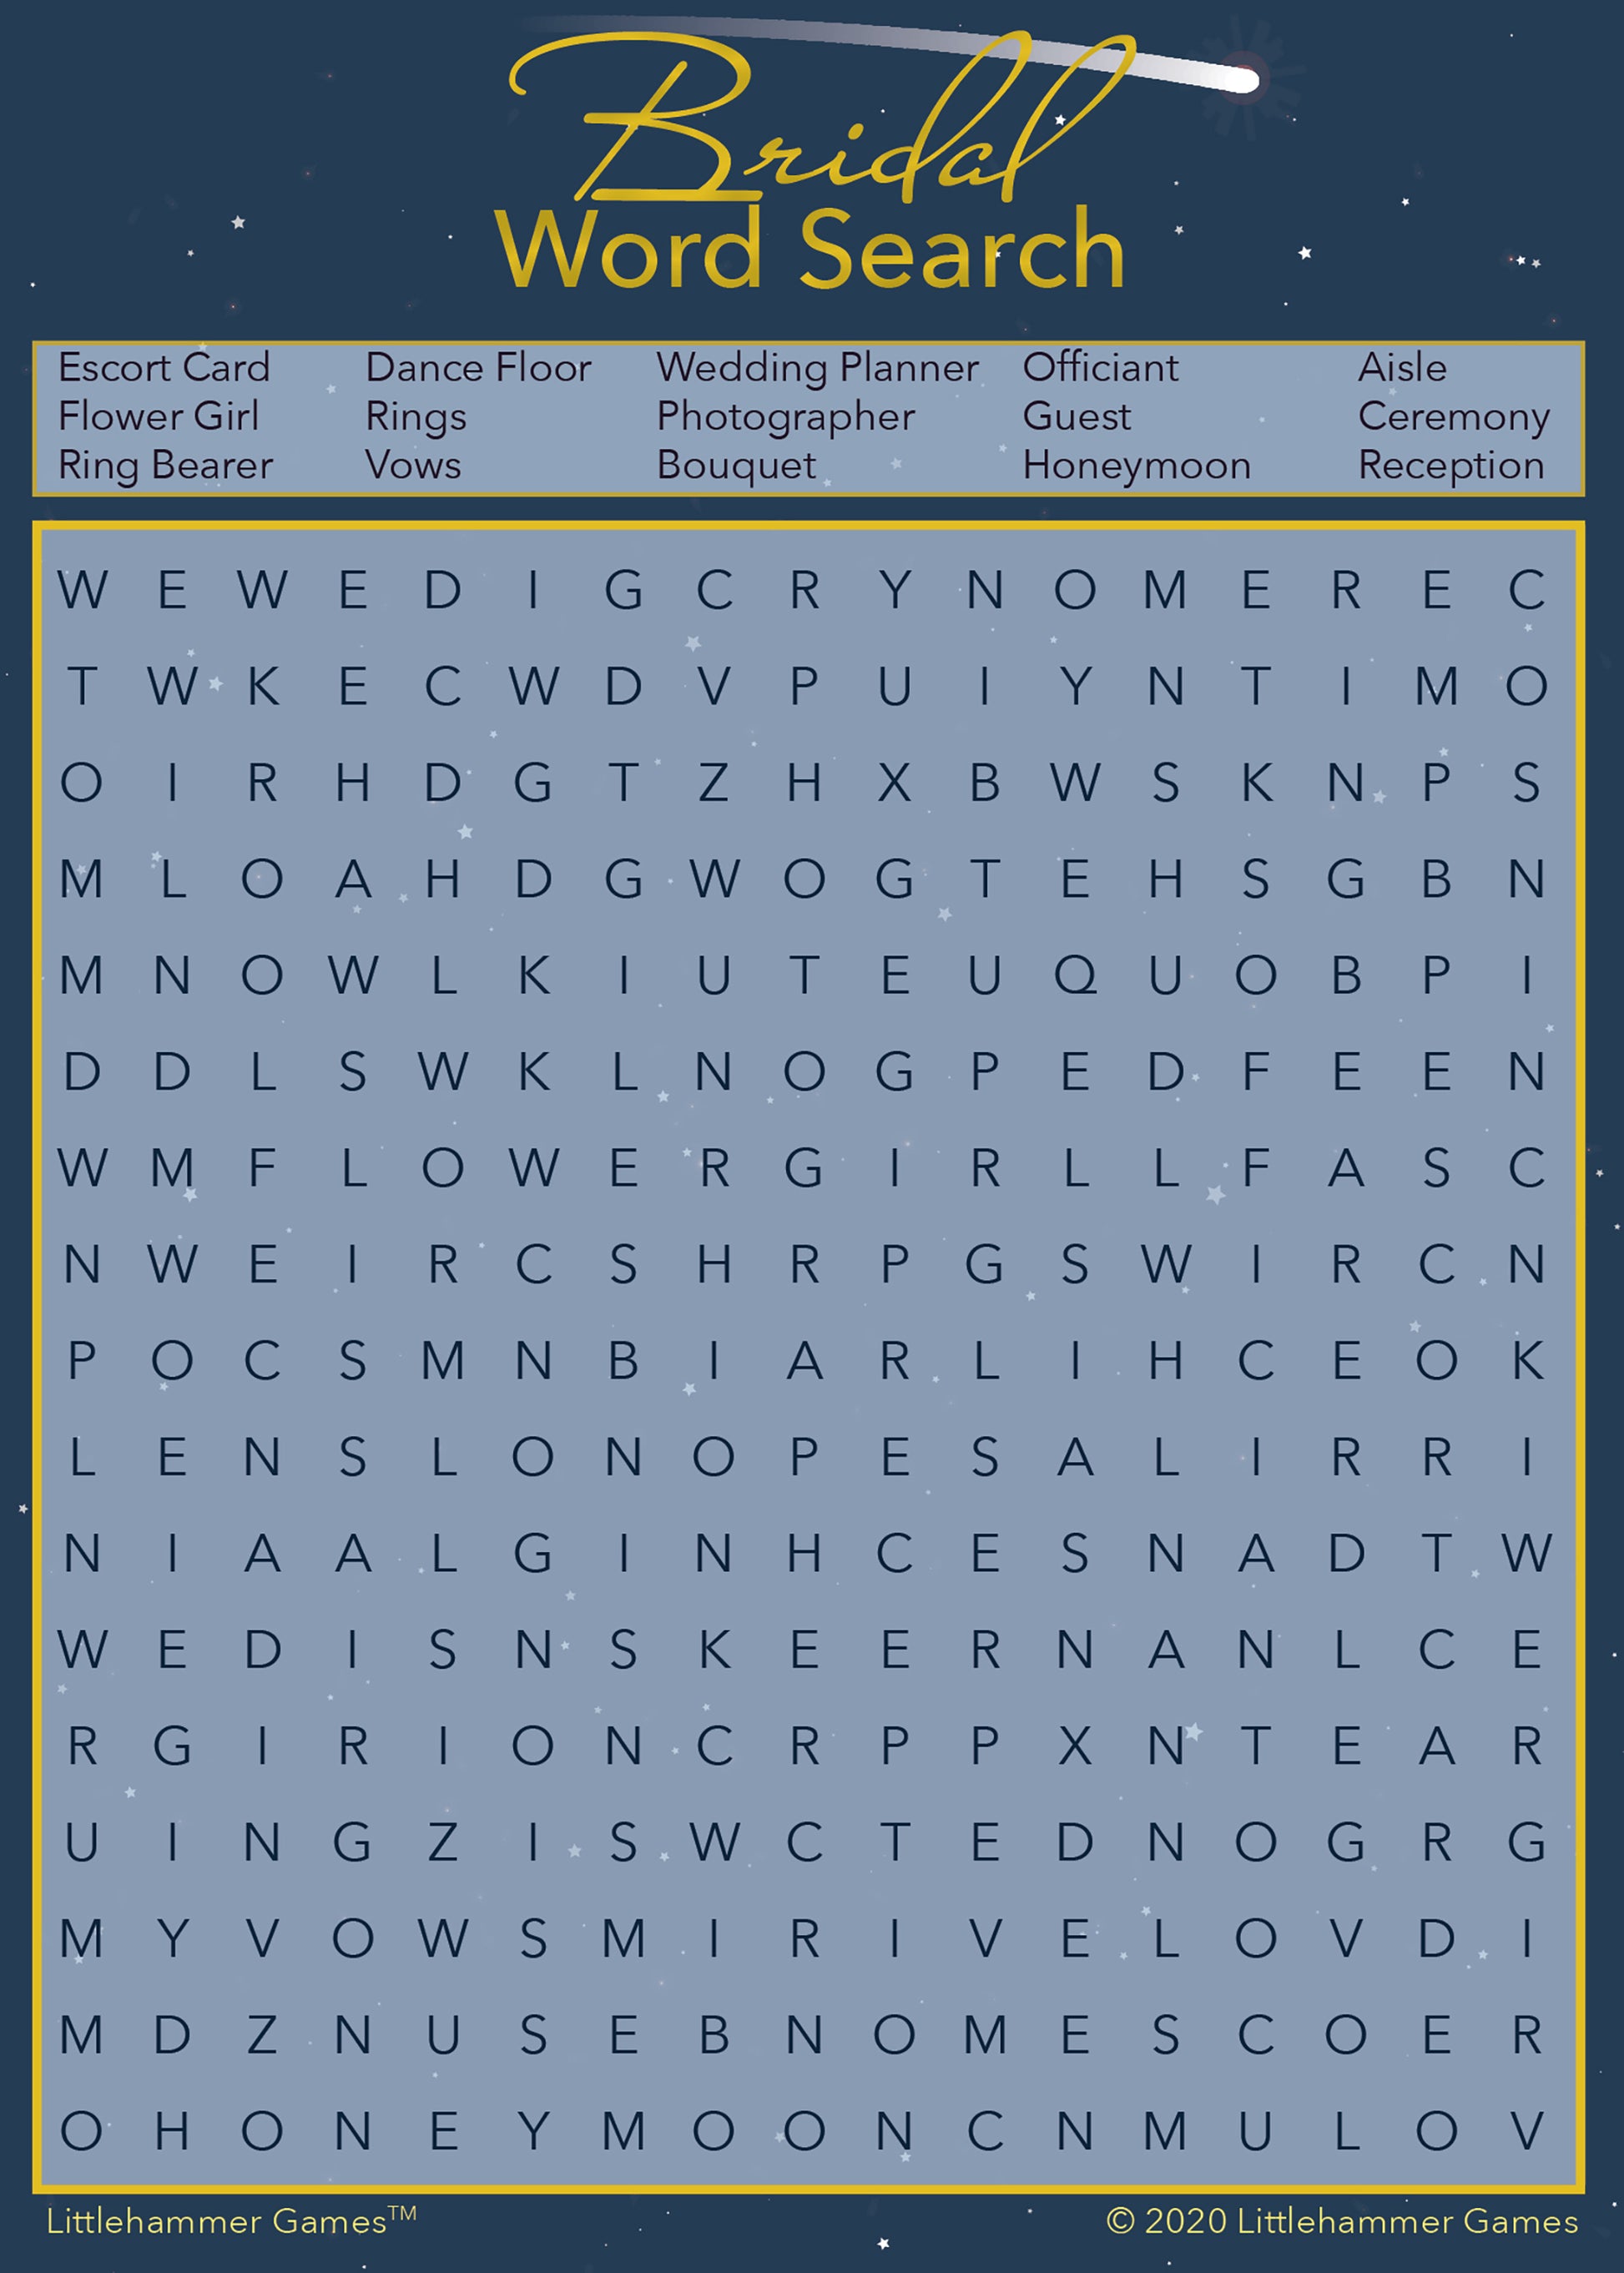 Bridal Word Search game card with a shooting star background